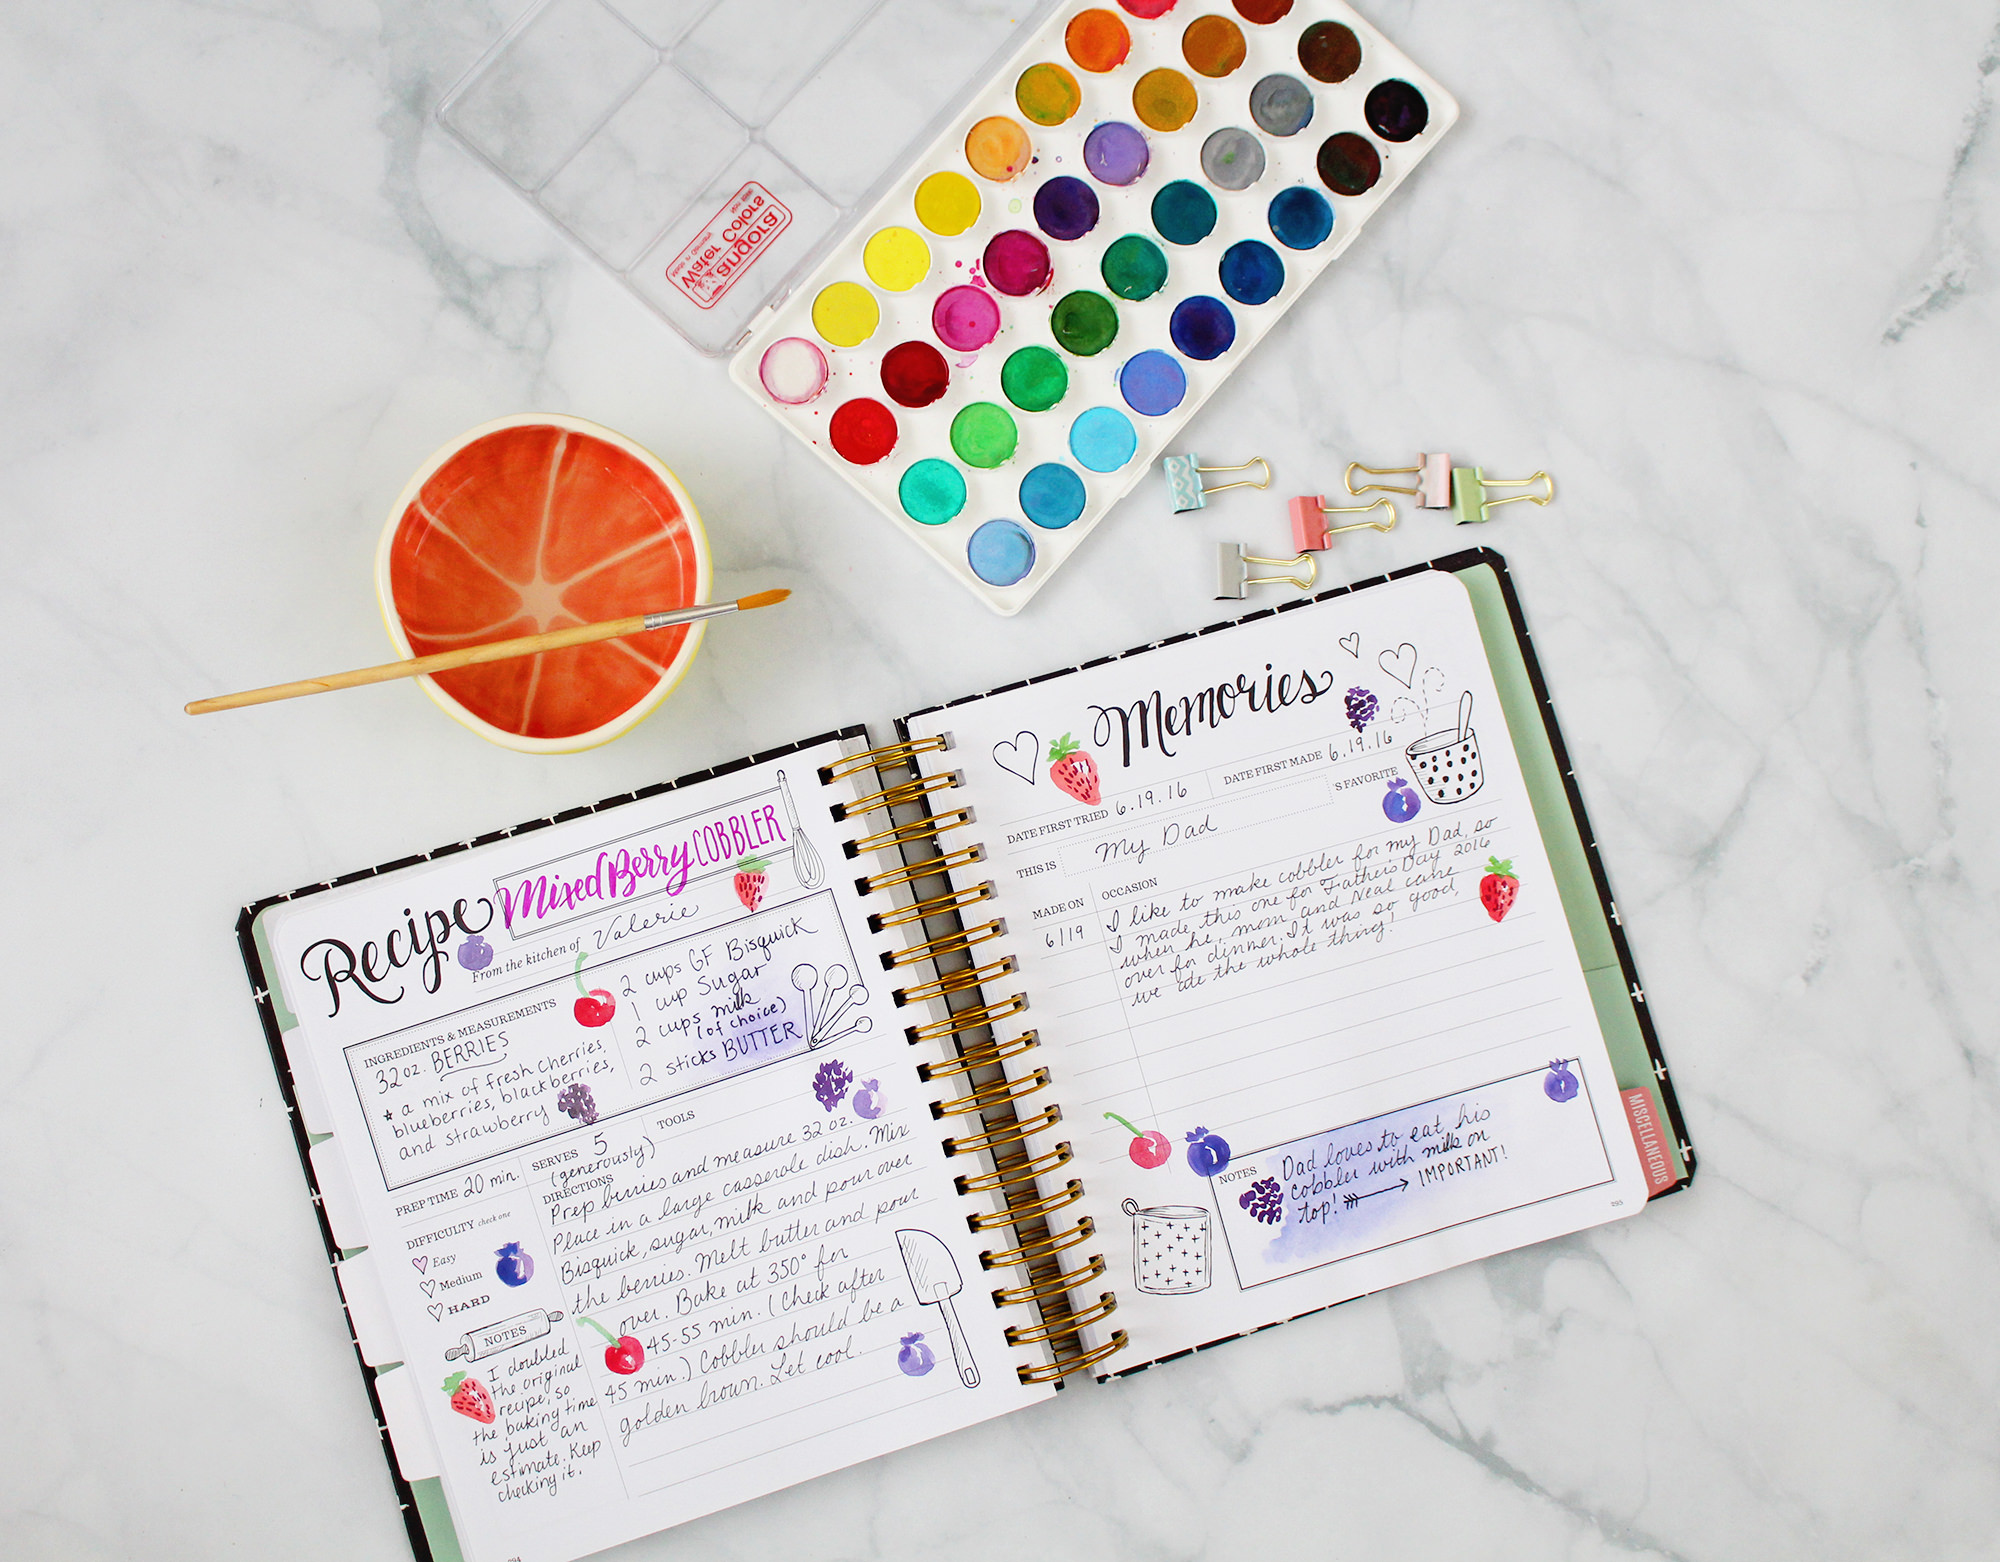 Every family recipe comes with different memories. Write them down in your Keepsake Kitchen Diary.